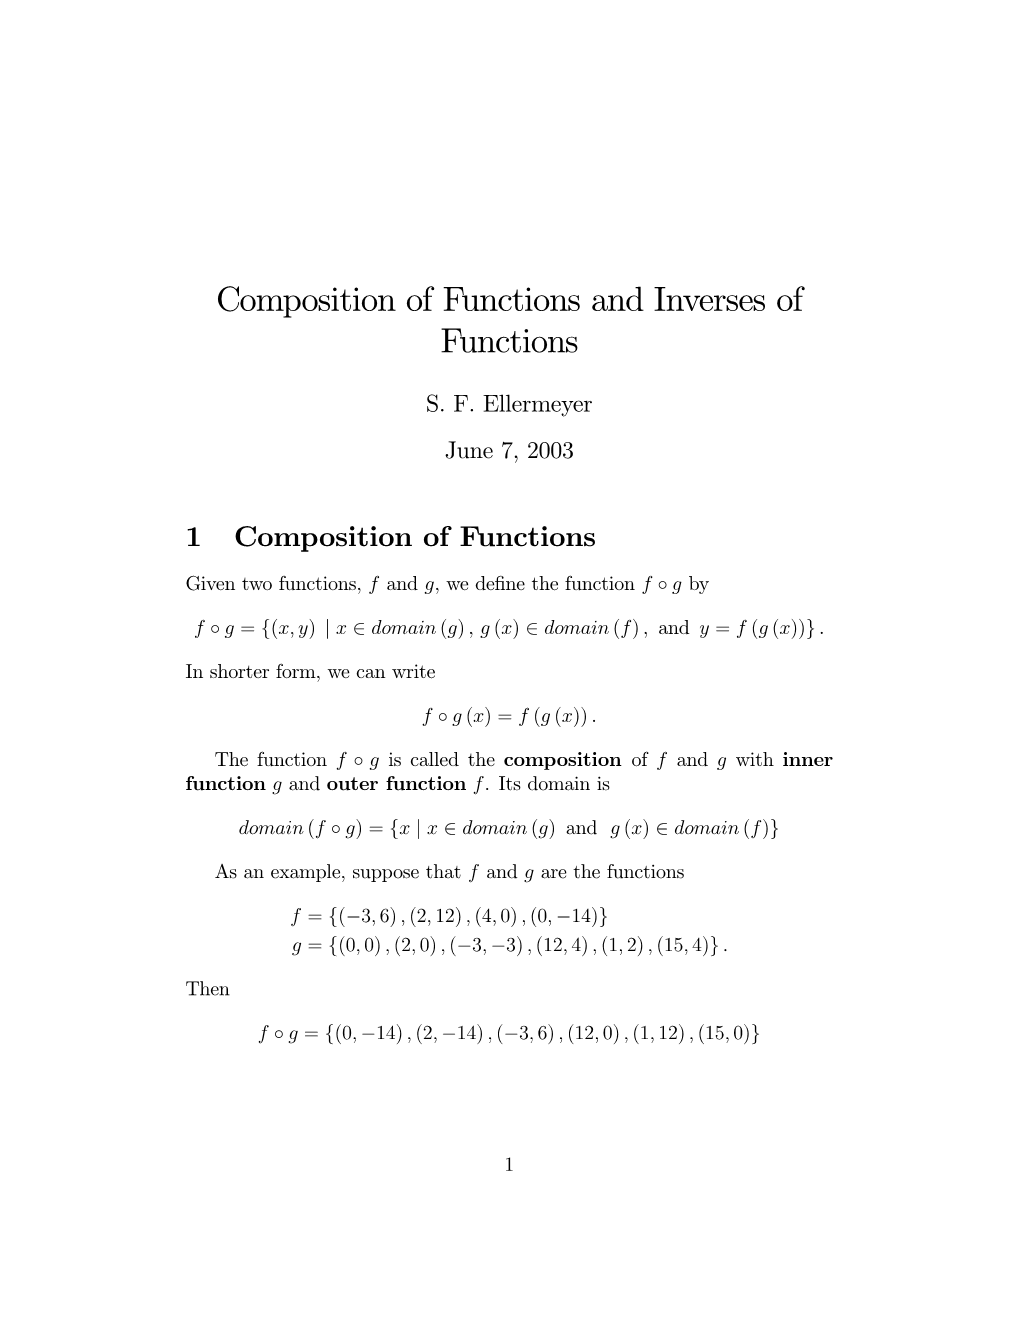 Composition of Functions and Inverses of Functions